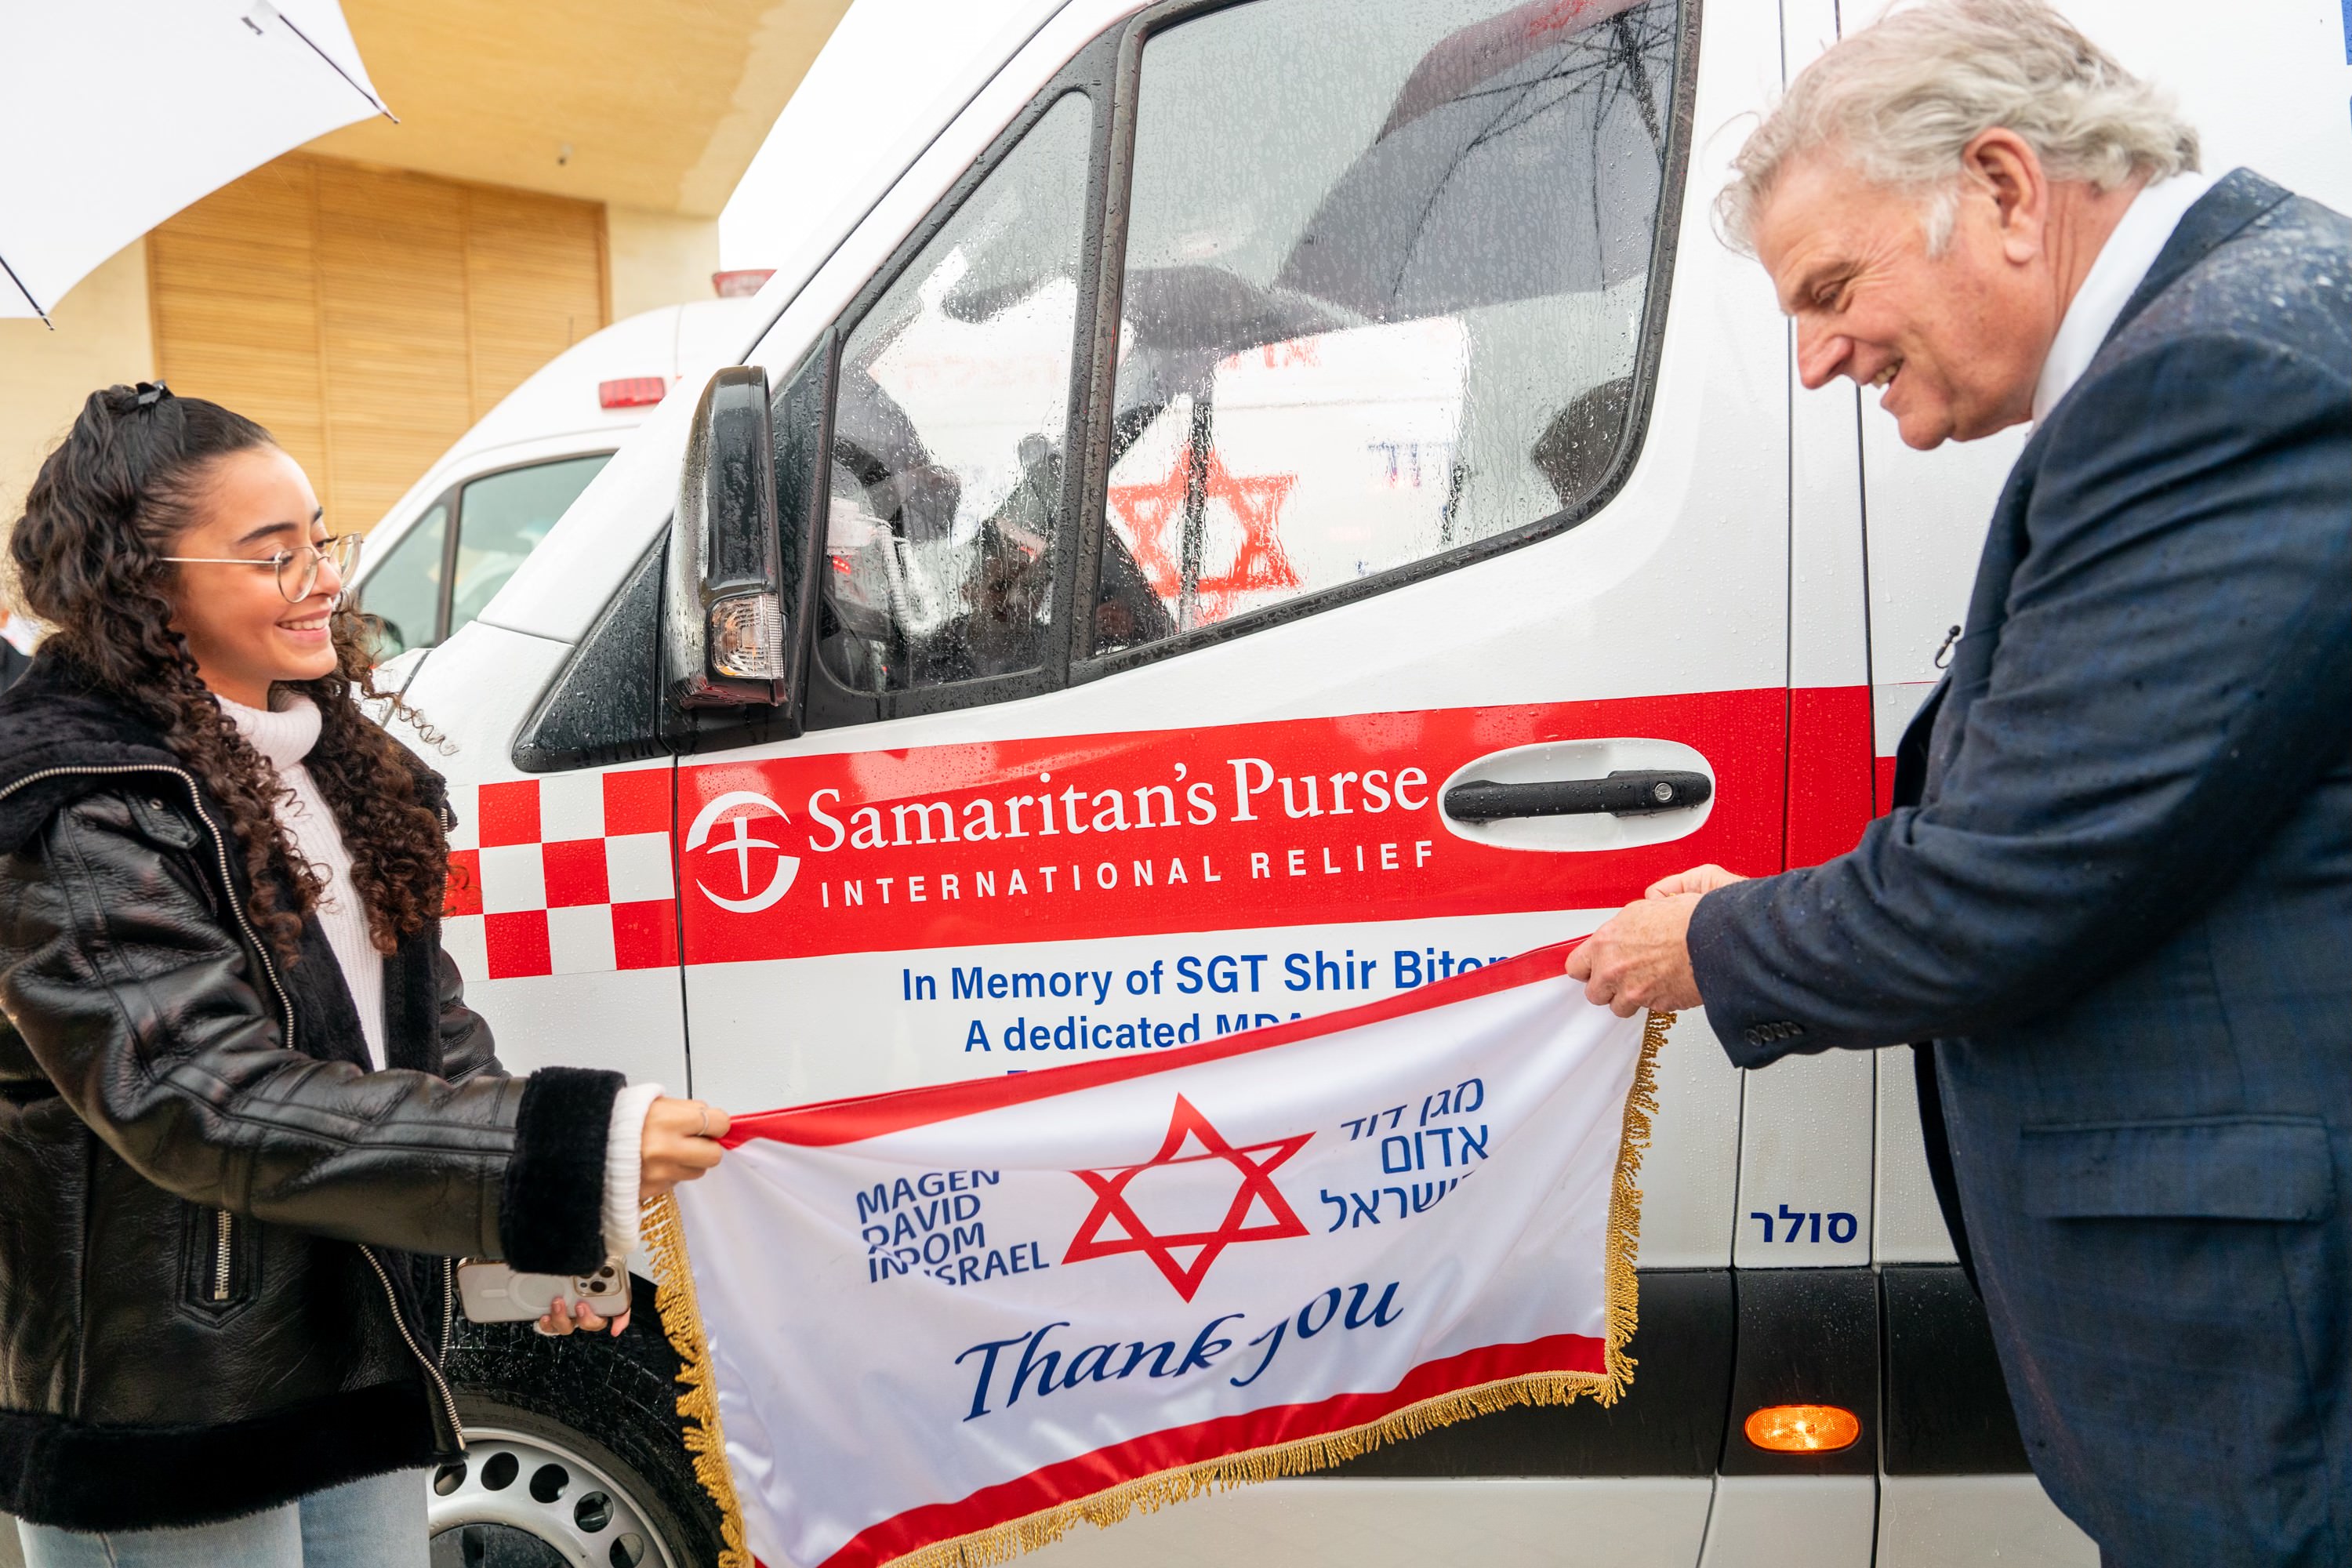 Franklin Graham's Samaritan's Purse to dedicate new airlift response center  'to help those who are suffering' | Fox News